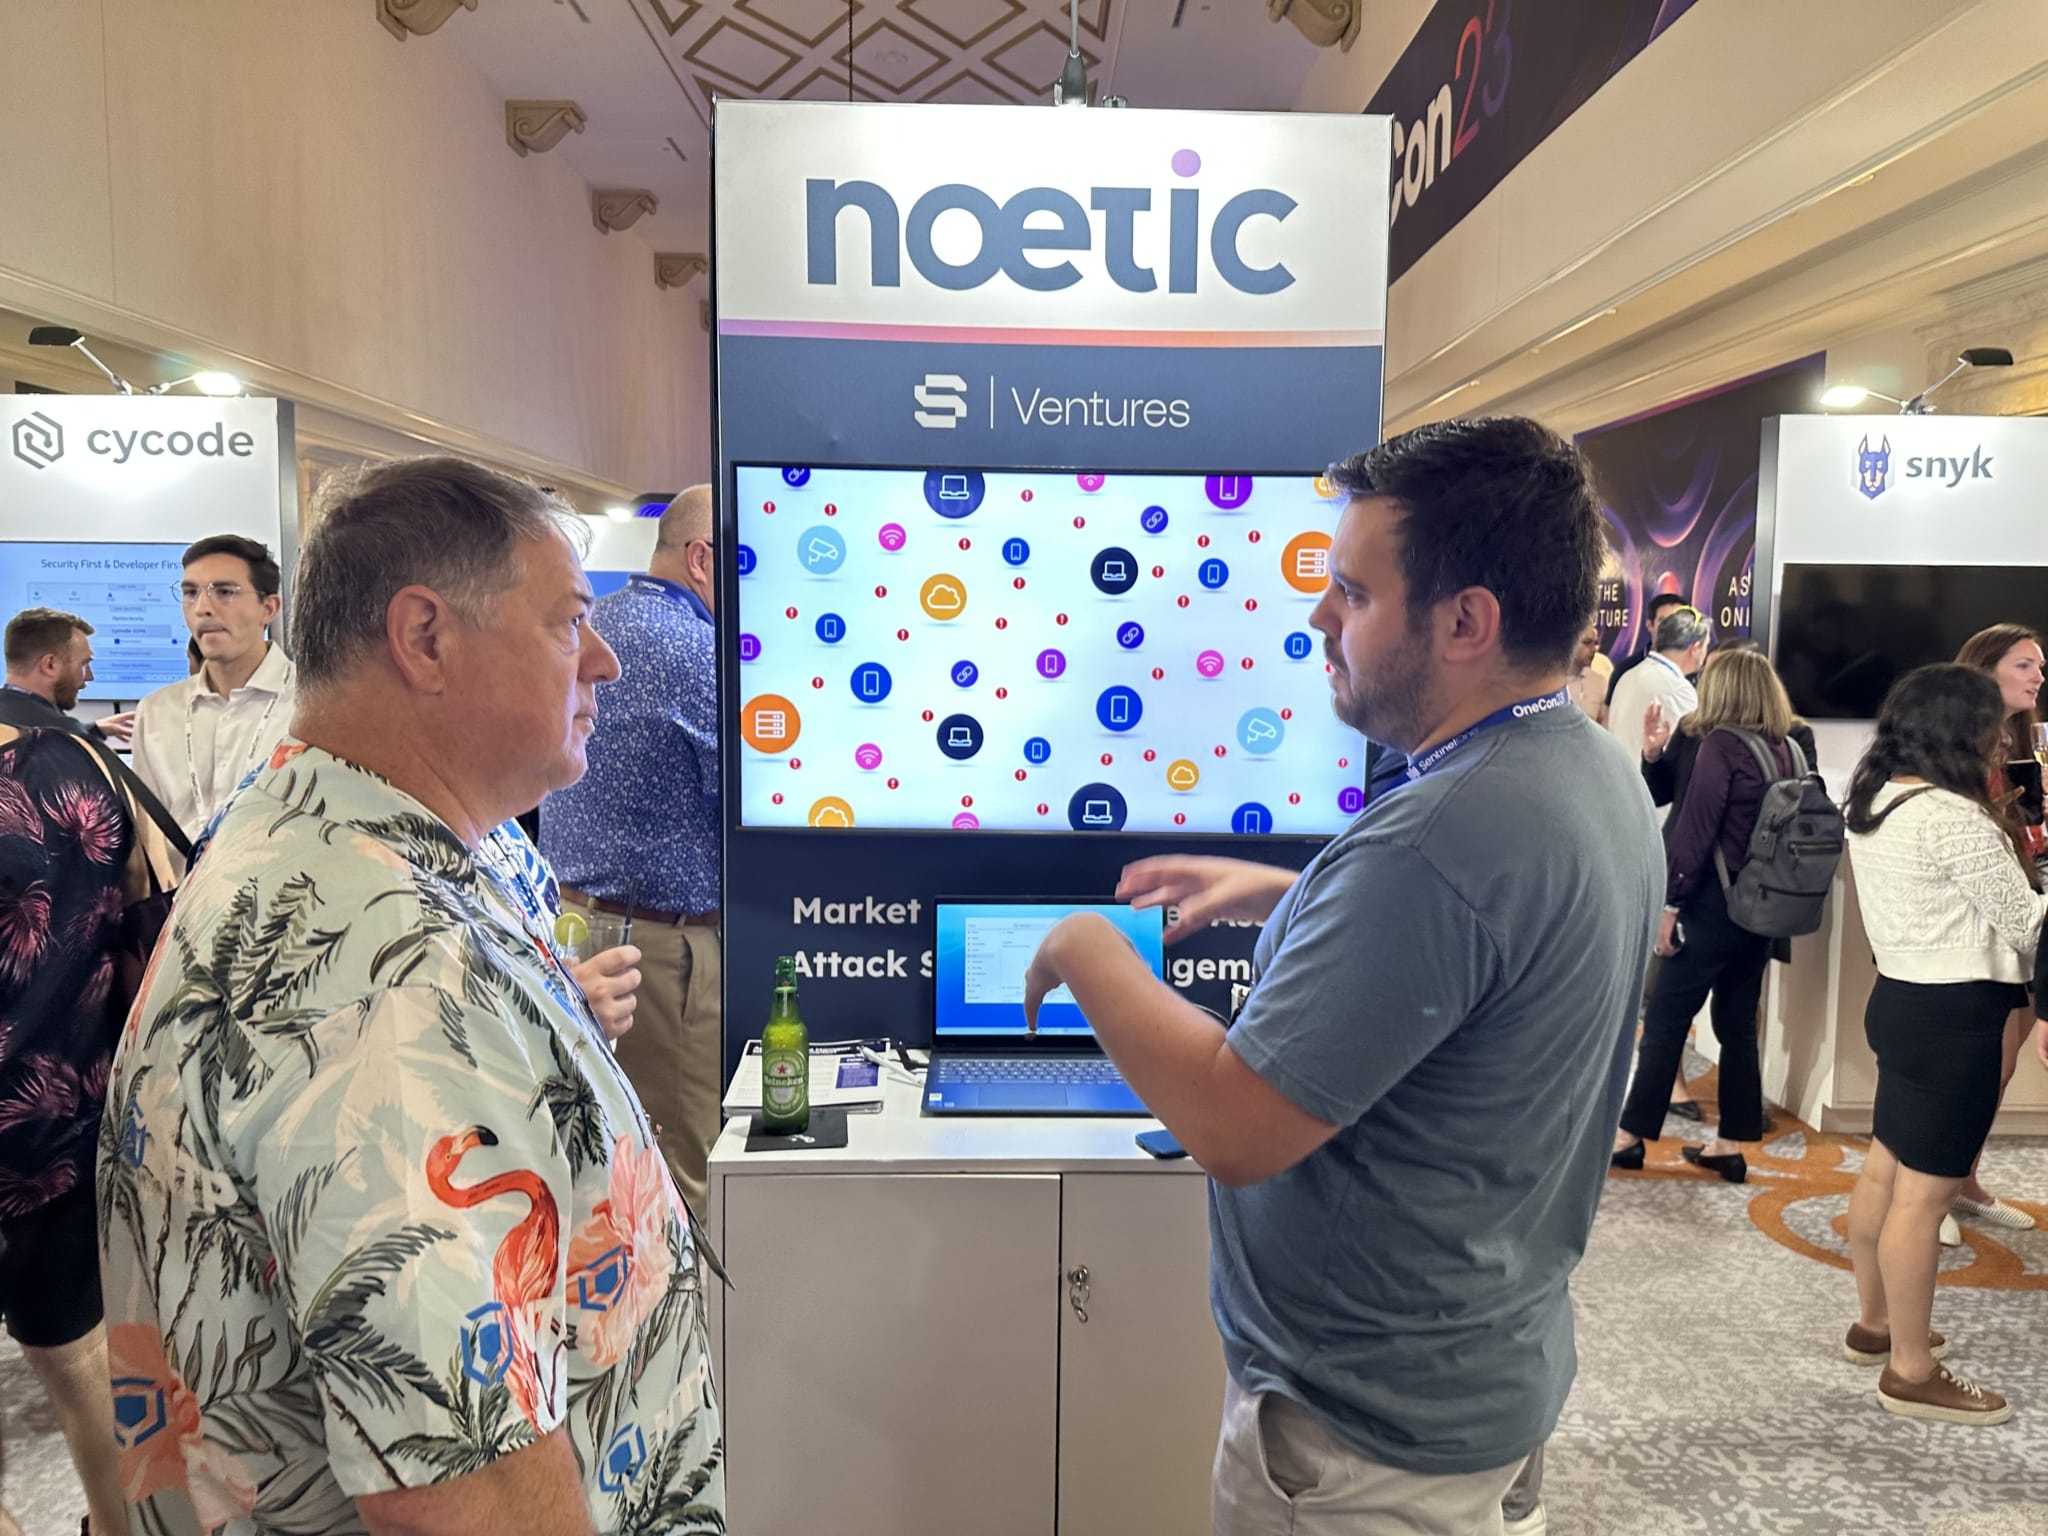 Craig Roberts presenting Noetic to an attendee at OneCon